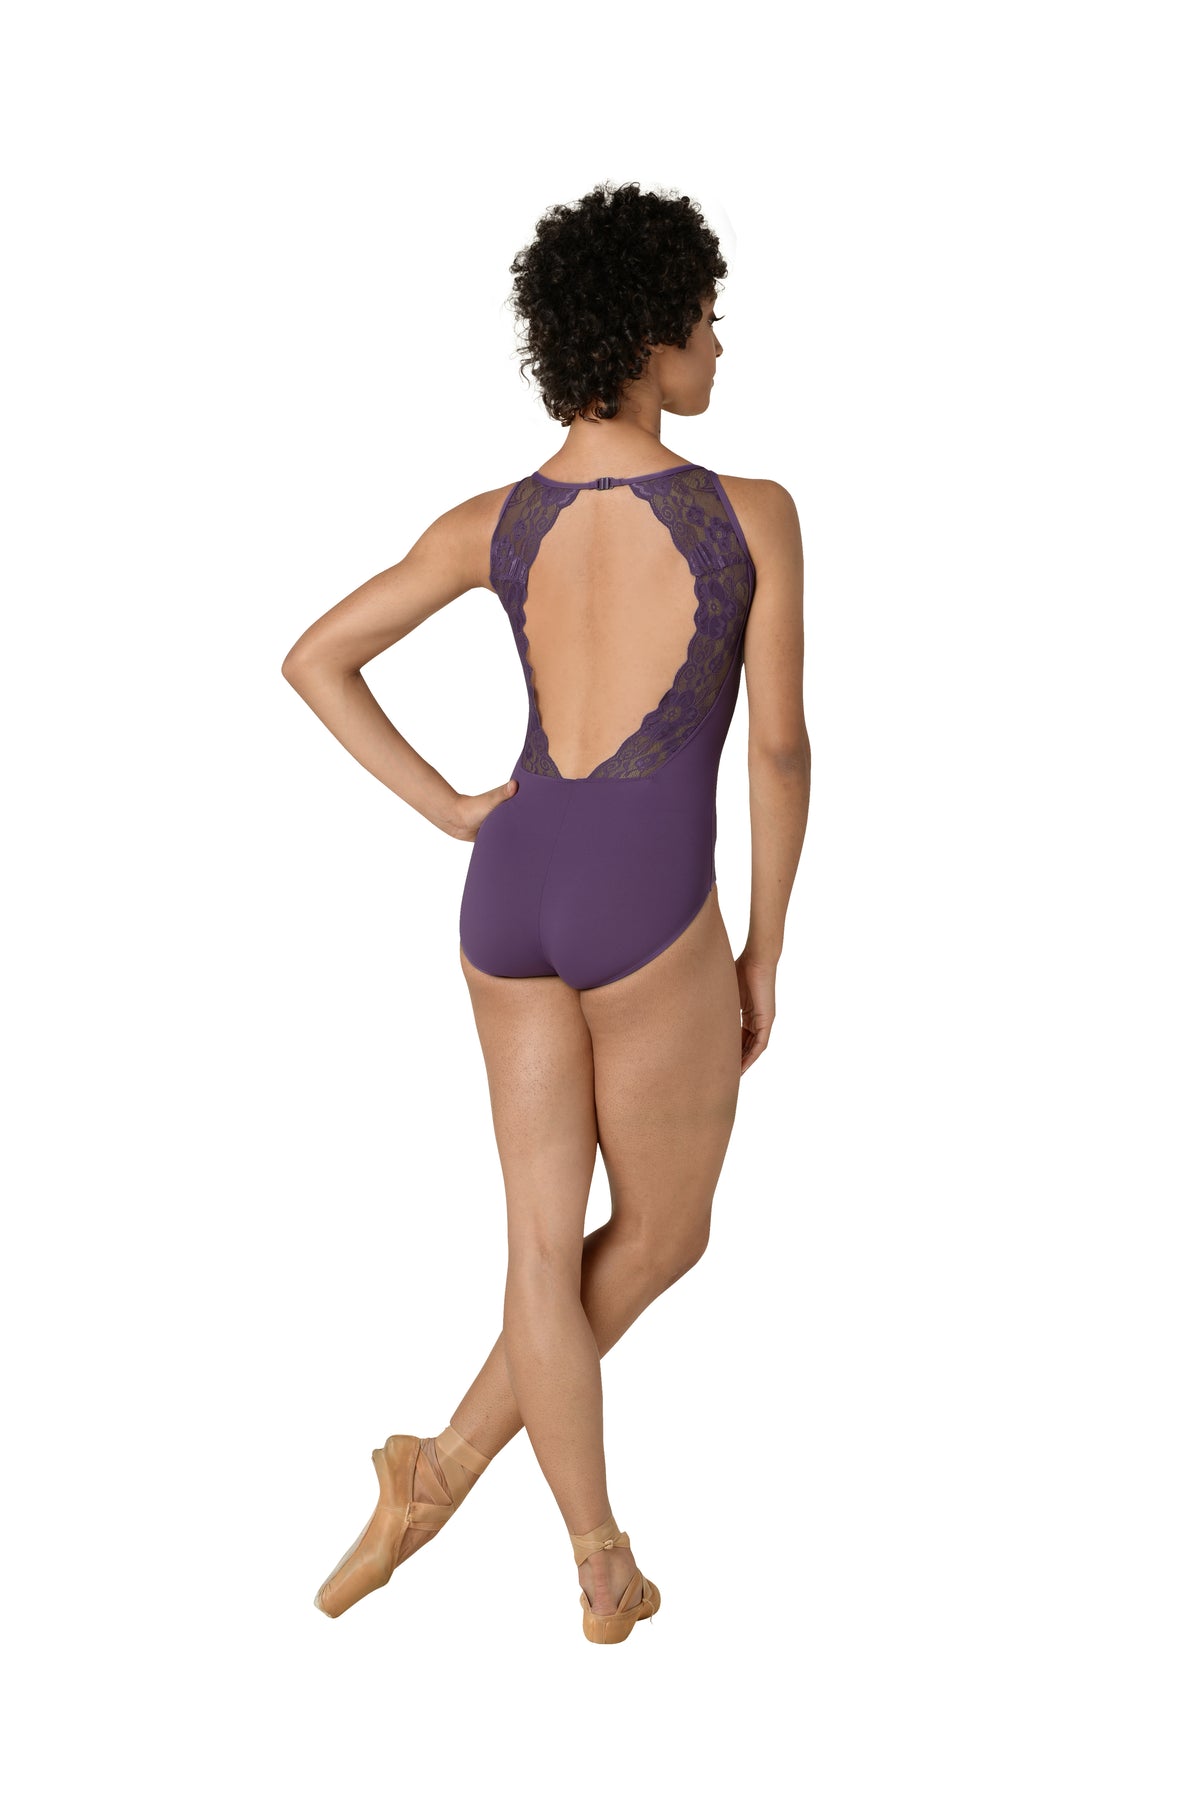 Adult Large Tank Style Lace Leotard with Built-In Bra - Amethyst